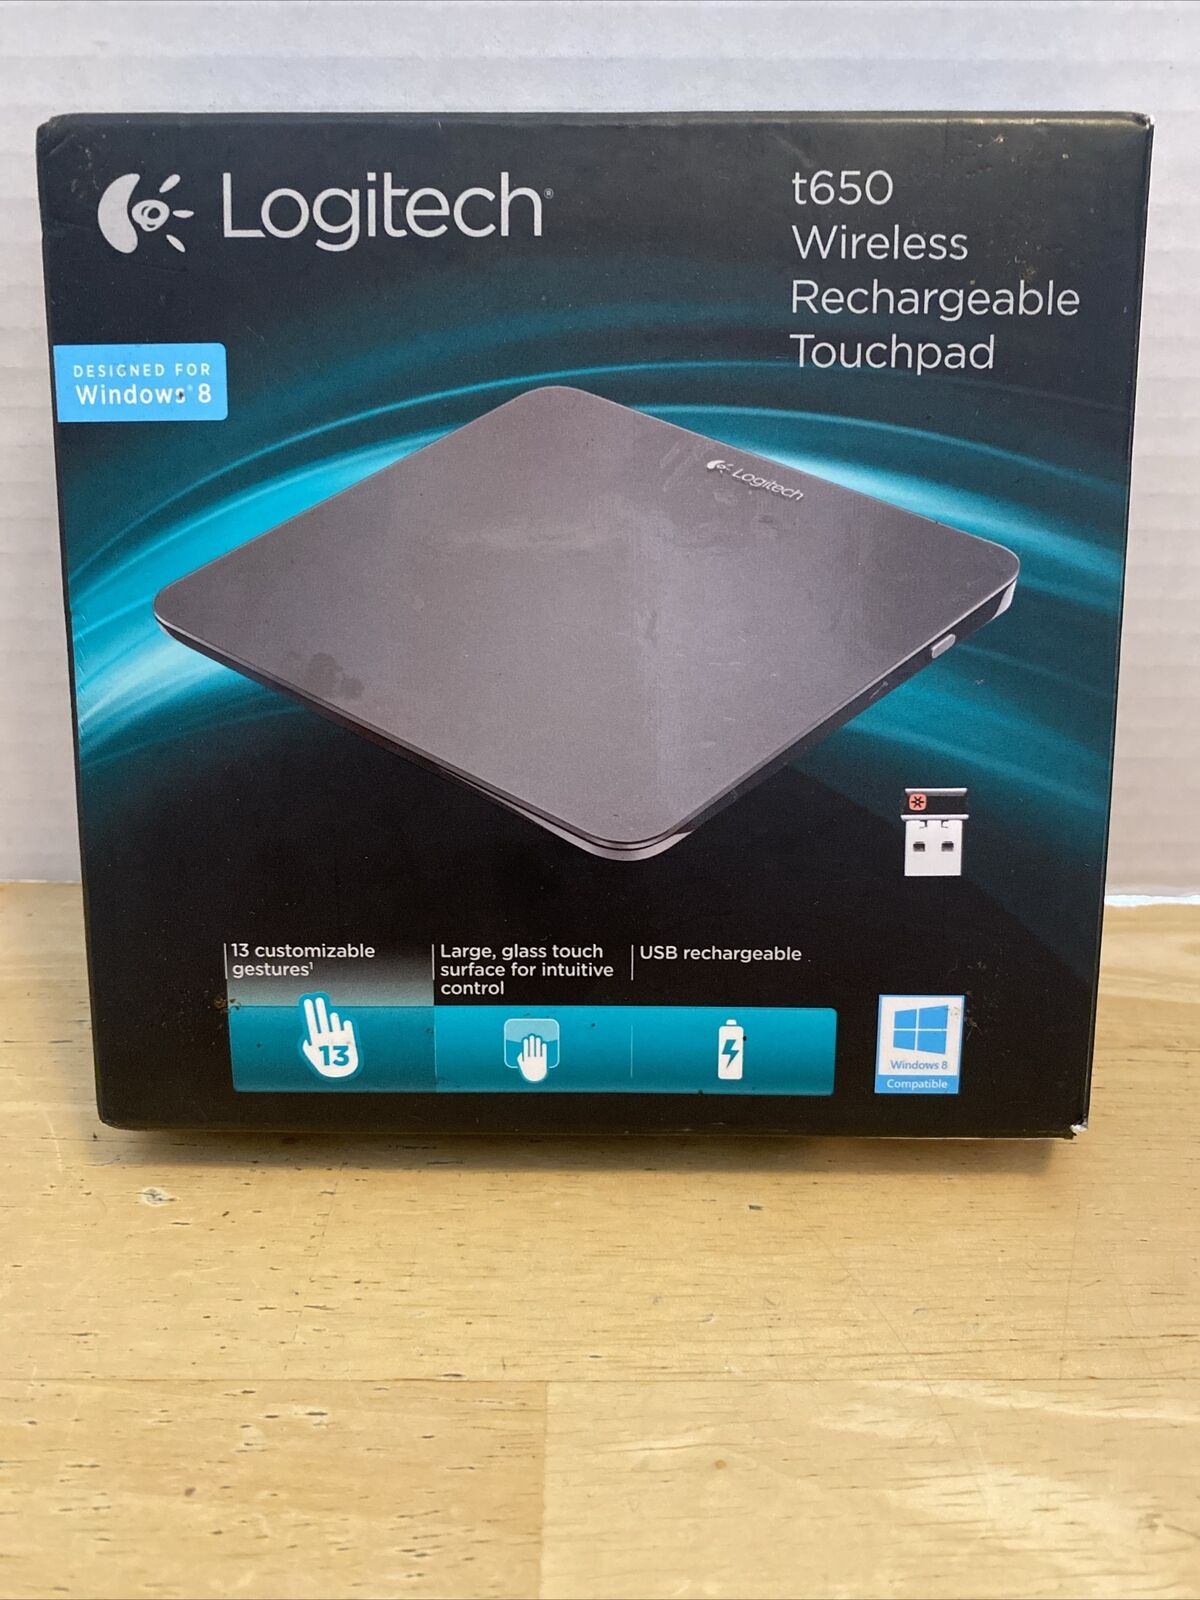 Rare Logitech Touchpad T650 Wireless Rechargeable Touchpad